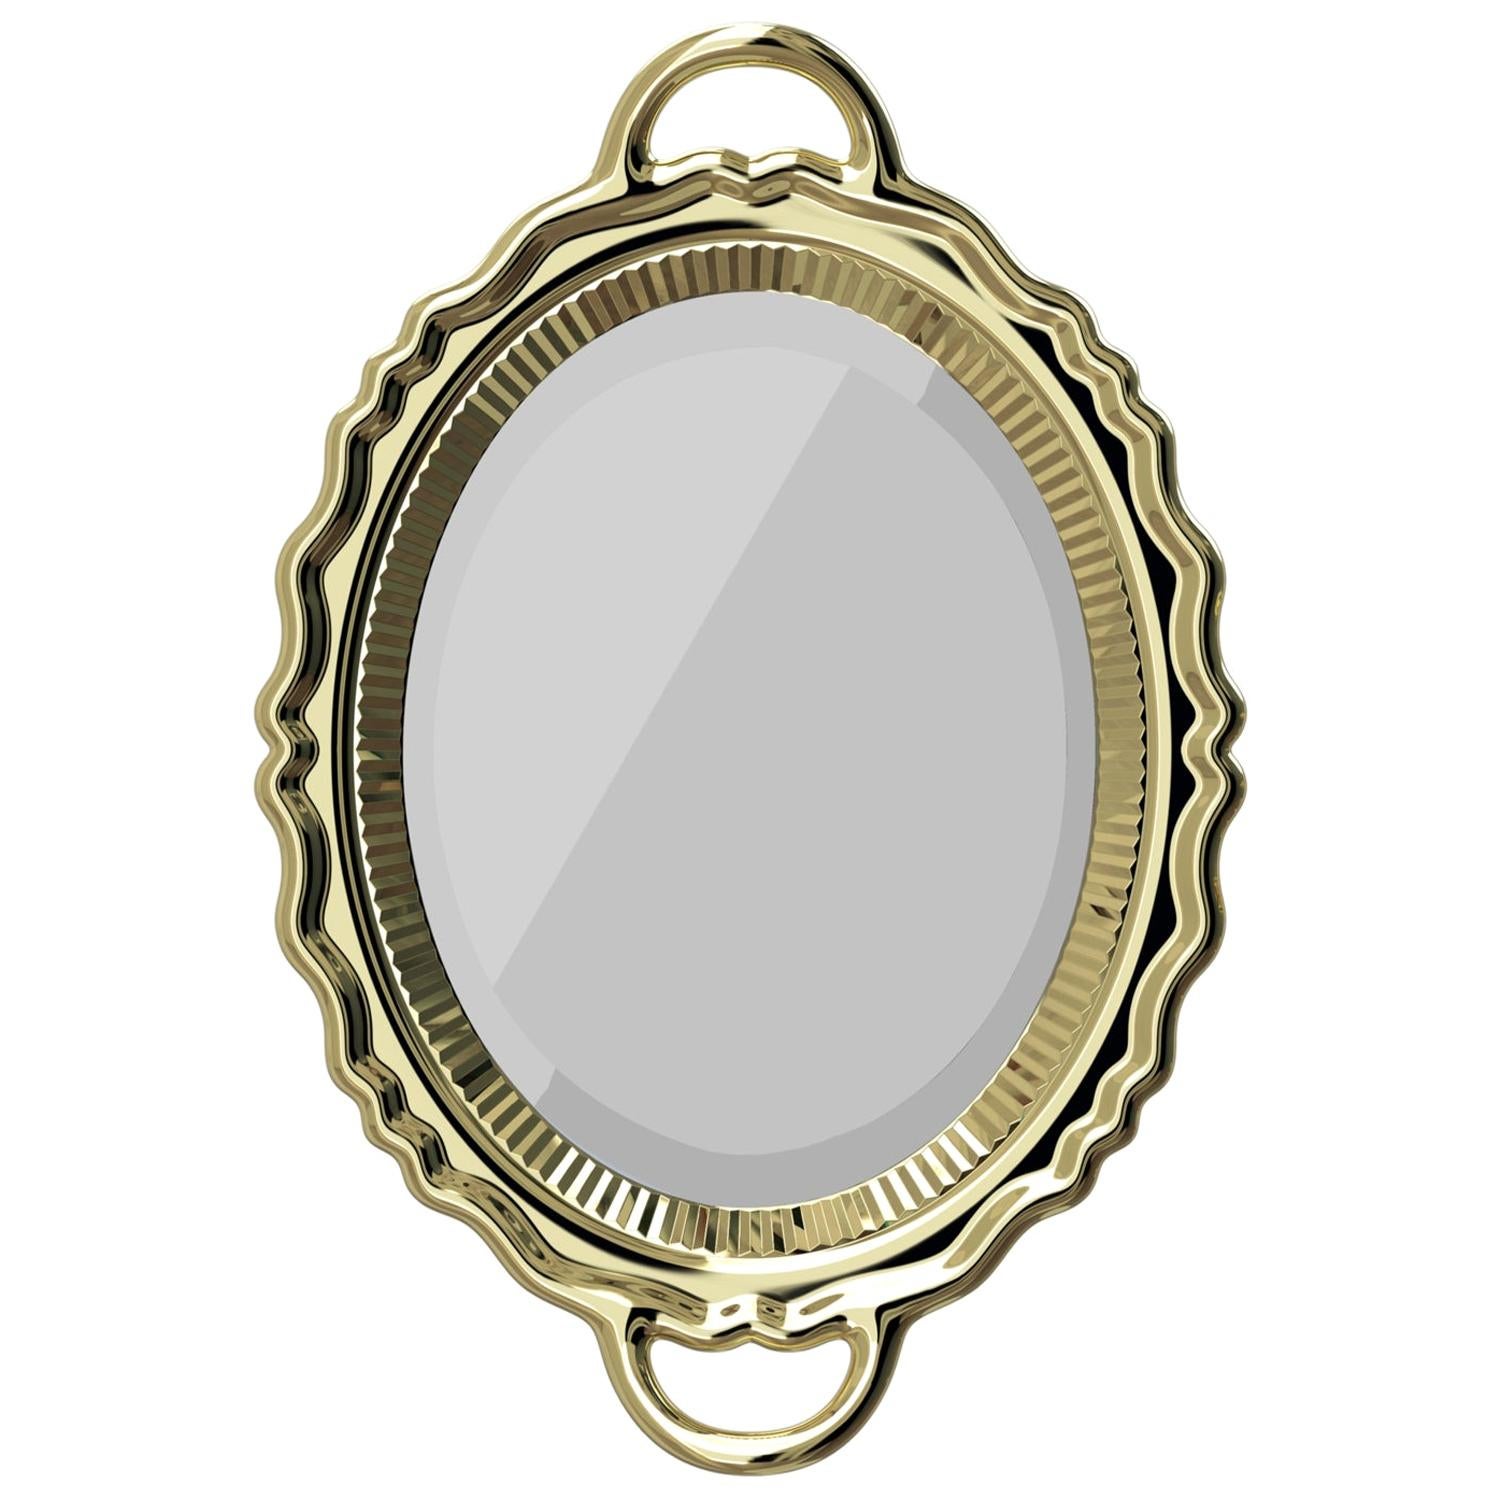 Gold Metal Finish Plateau Mirror, Designed by Studio Job, Made in Italy